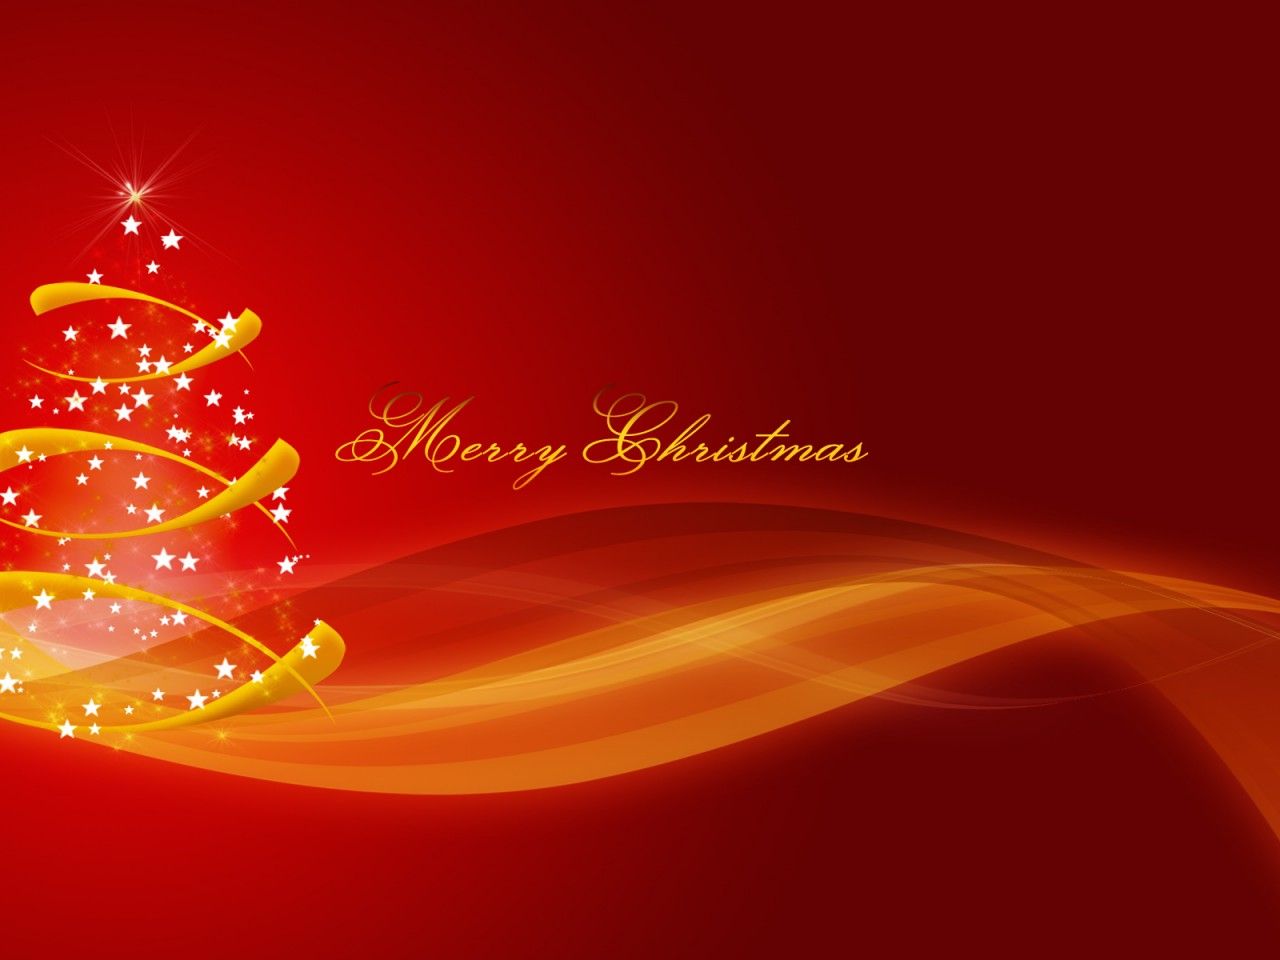 Simple Merry Christmas Wallpaper - HD Wallpapers